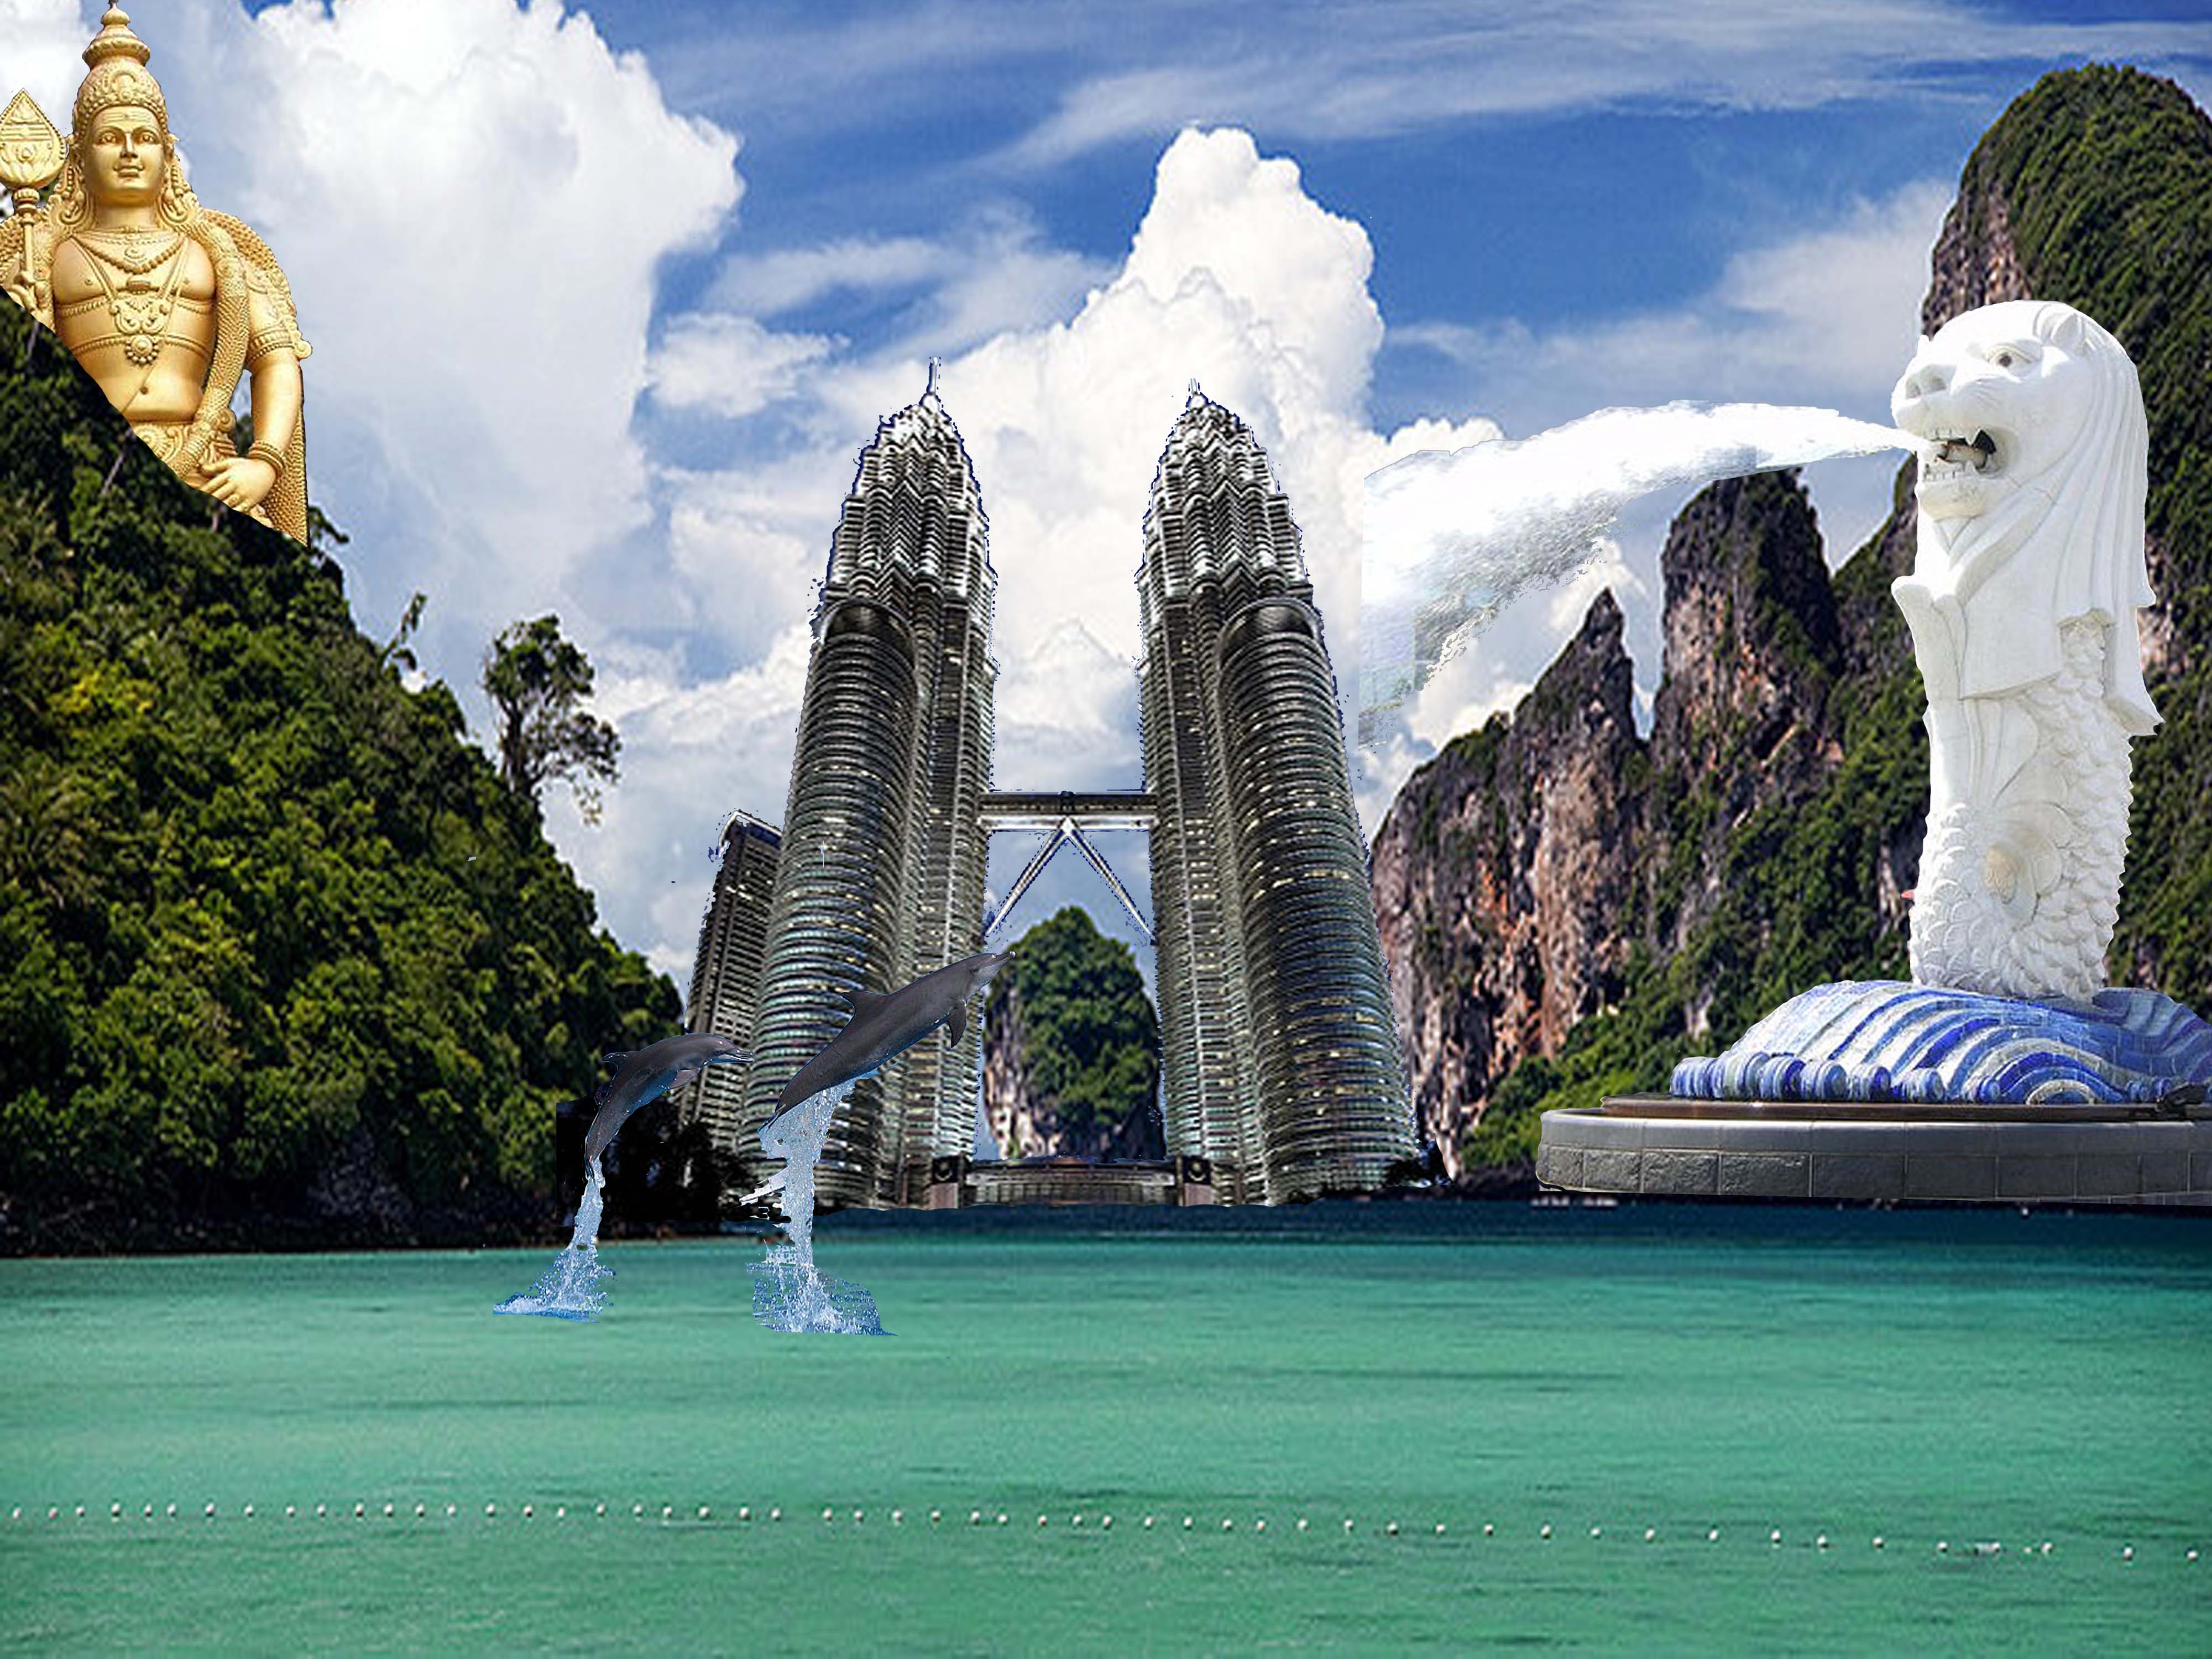 tour packages for singapore malaysia thailand from india